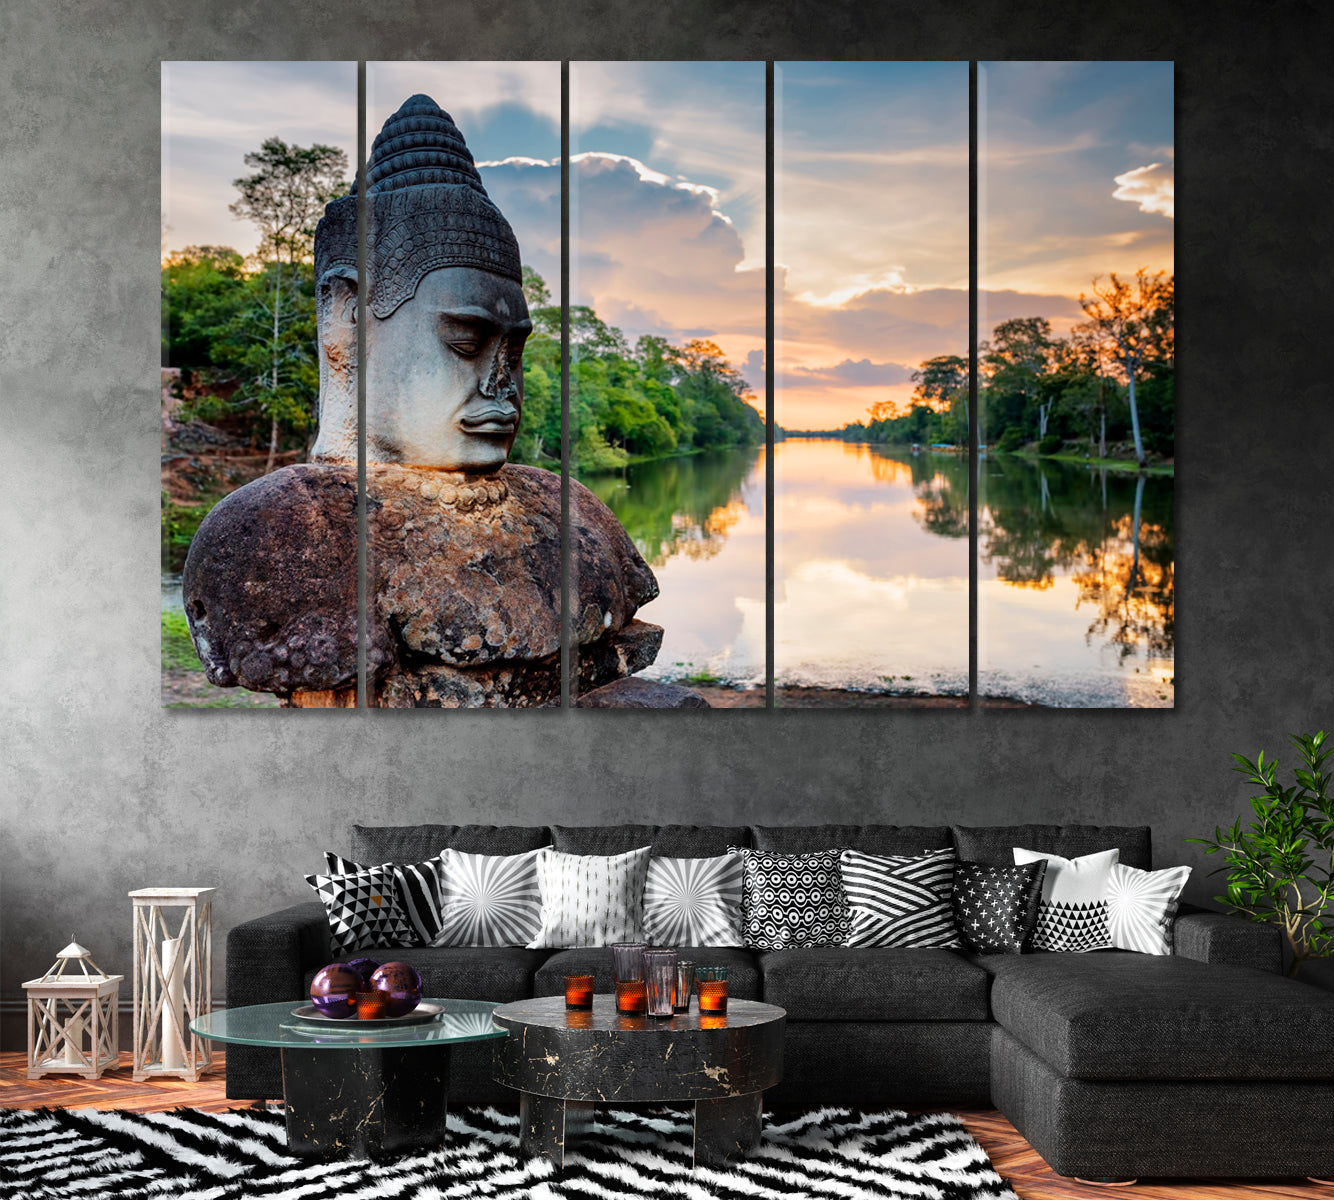 Ancient Statue near South Gate of Angkor Thom Cambodia Canvas Print ArtLexy 5 Panels 36"x24" inches 